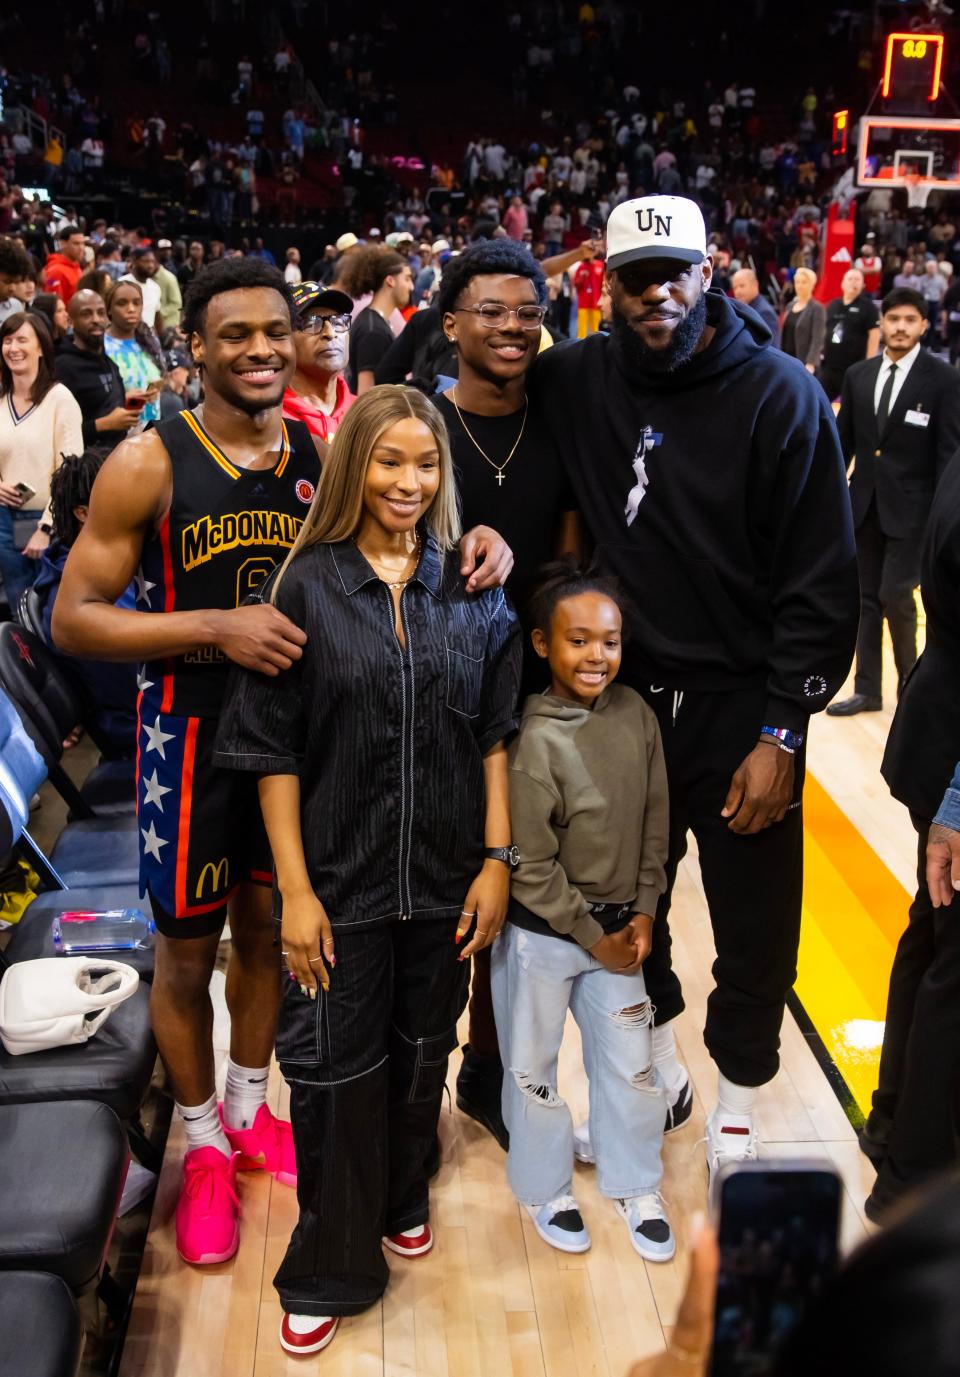 Bronny James (6) takes a photo with his family after the McDonald's All American game.